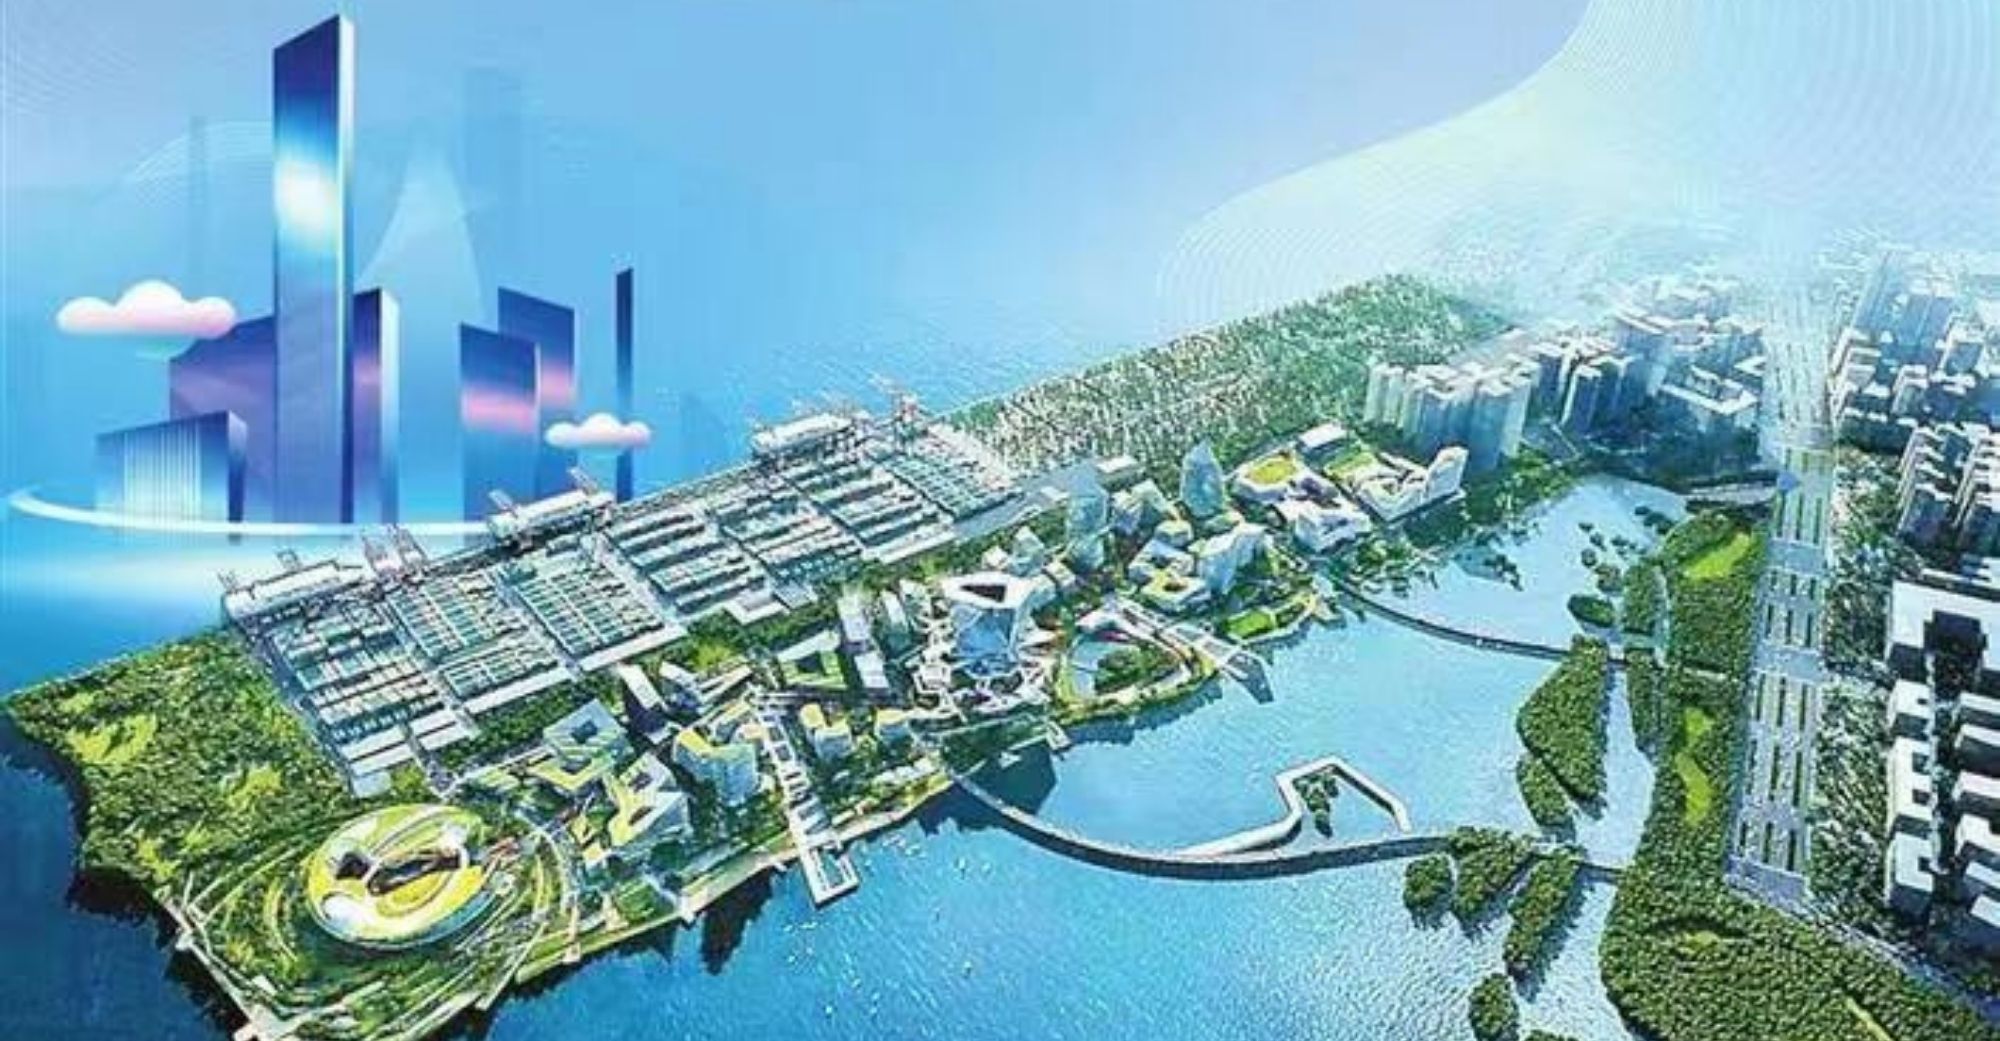 Tencent to Build Global Headquarters on Artificial Island With $5.7 Billion Investment in Shenzhen